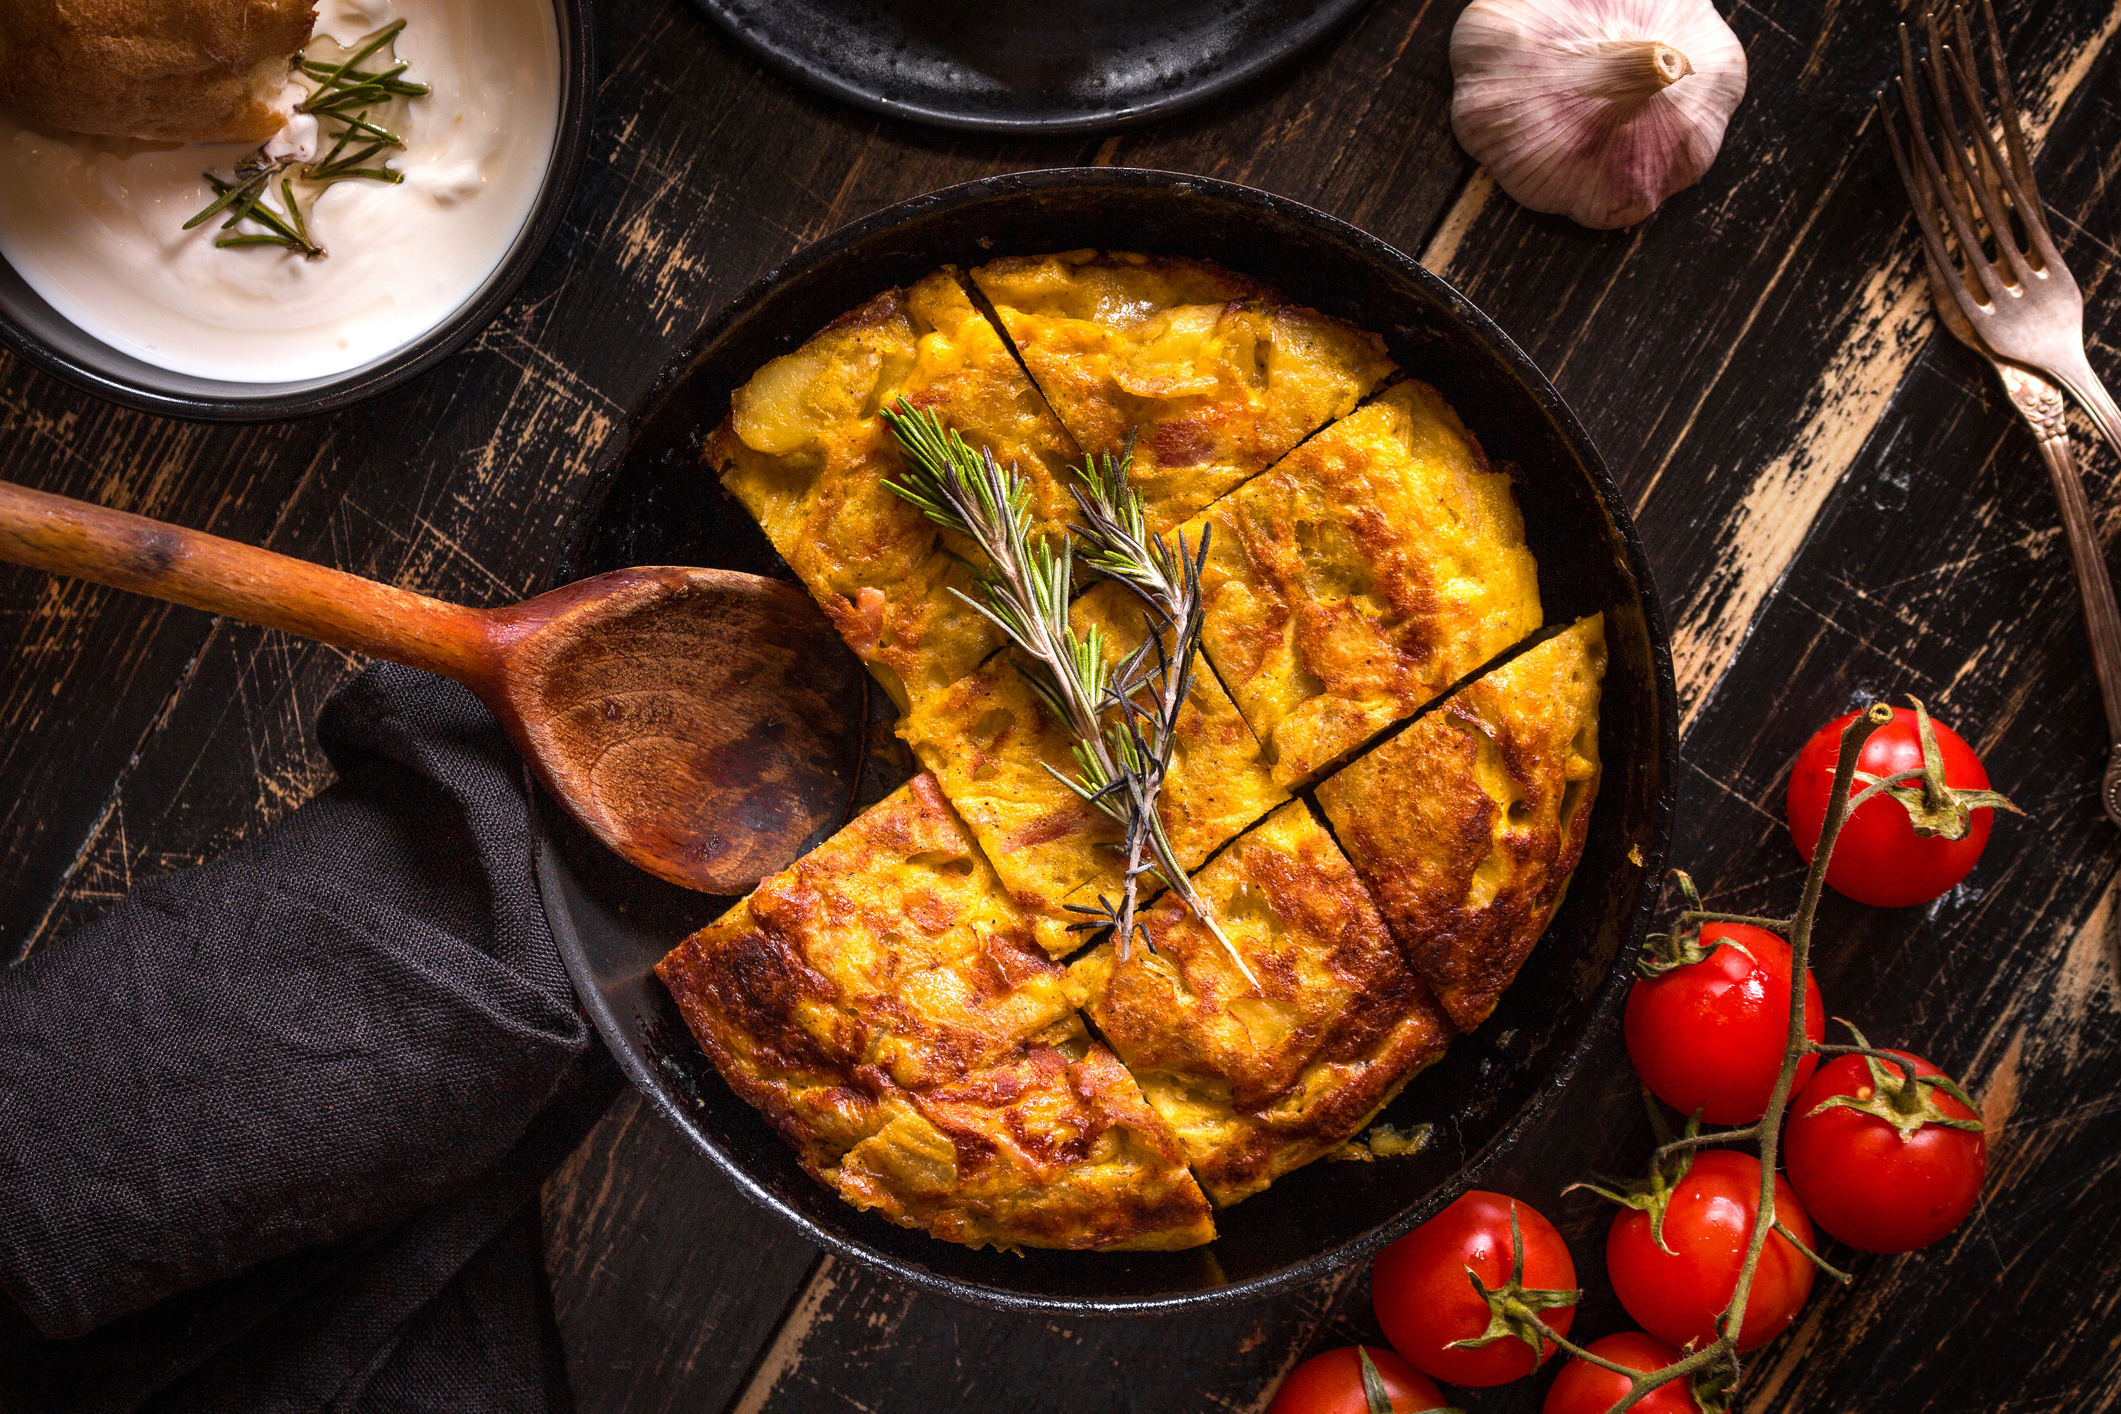 Getty Images - Spanish Omlette